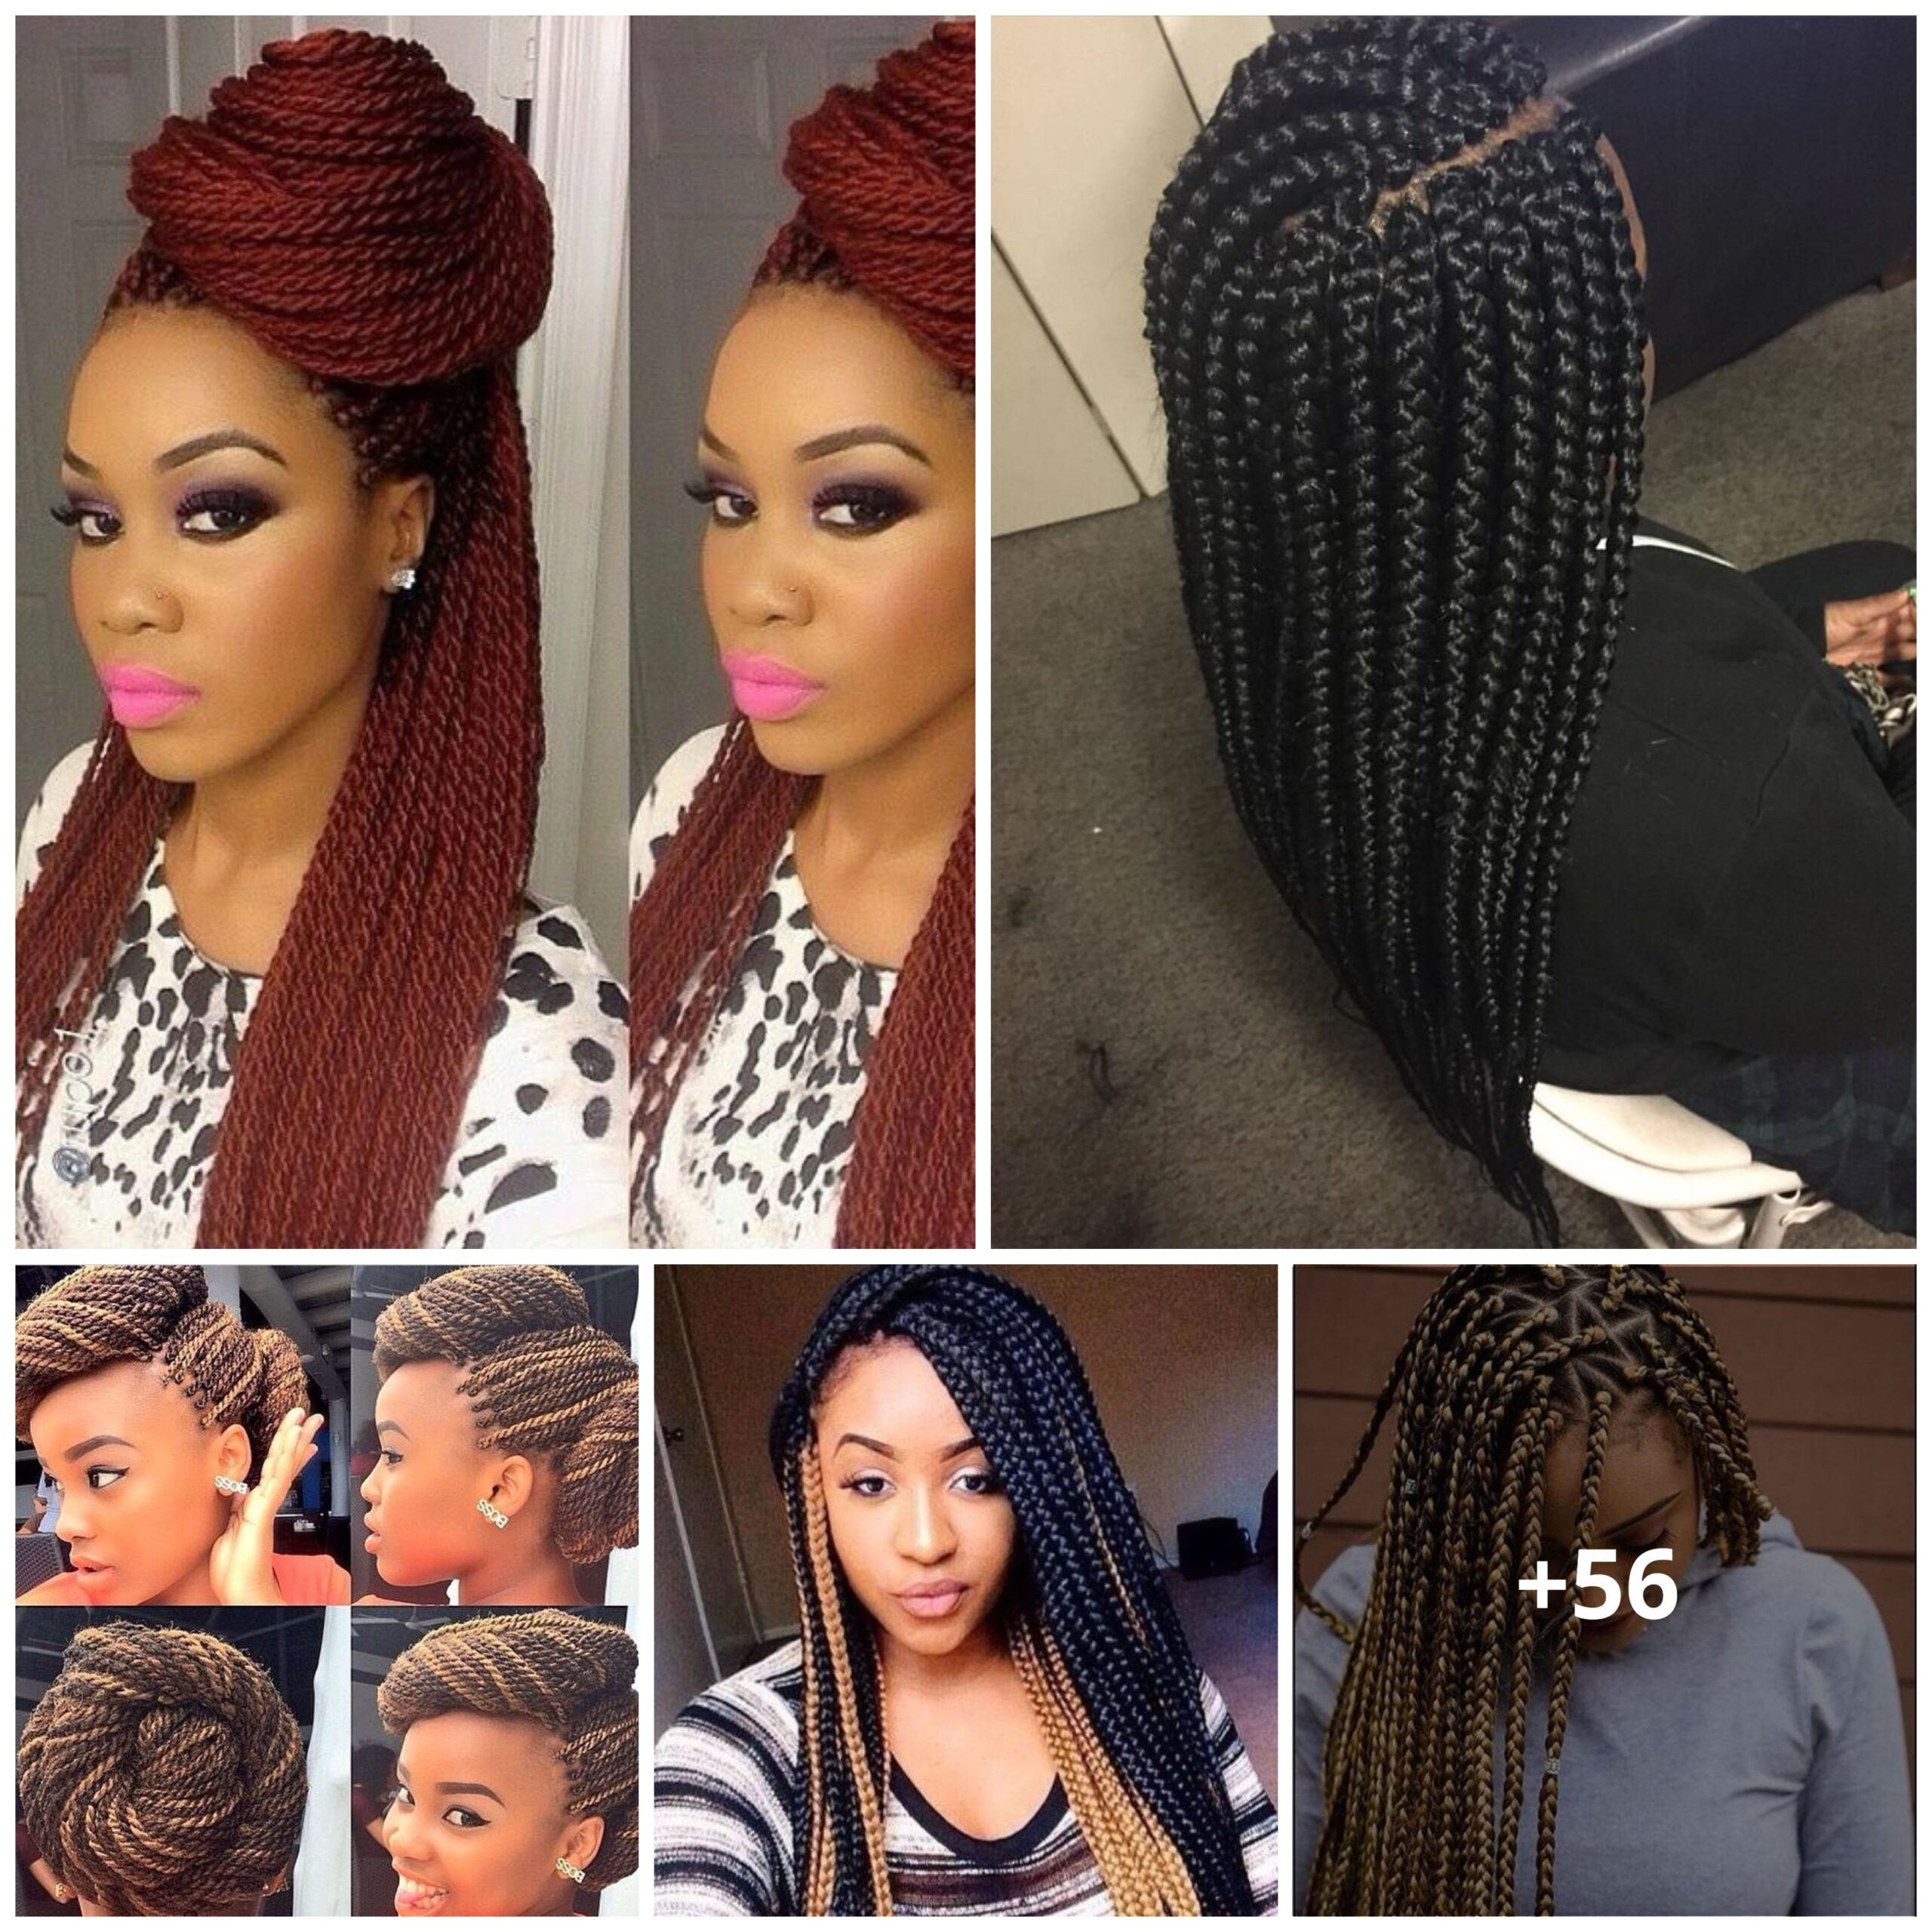 Maintaining box braids and Senegalese twists